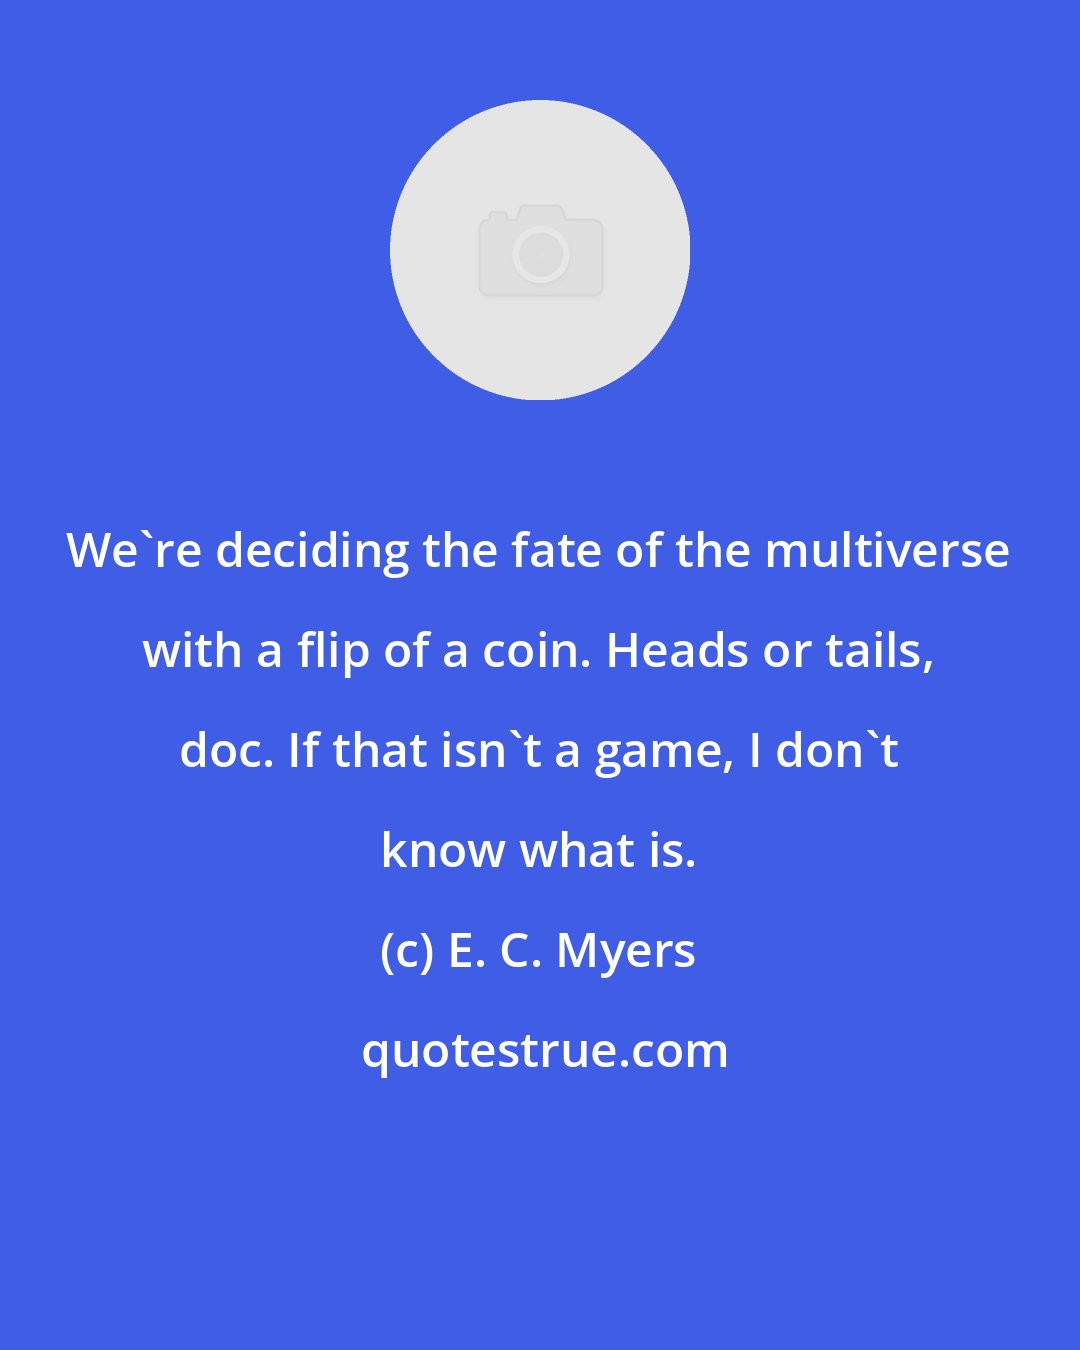 E. C. Myers: We're deciding the fate of the multiverse with a flip of a coin. Heads or tails, doc. If that isn't a game, I don't know what is.